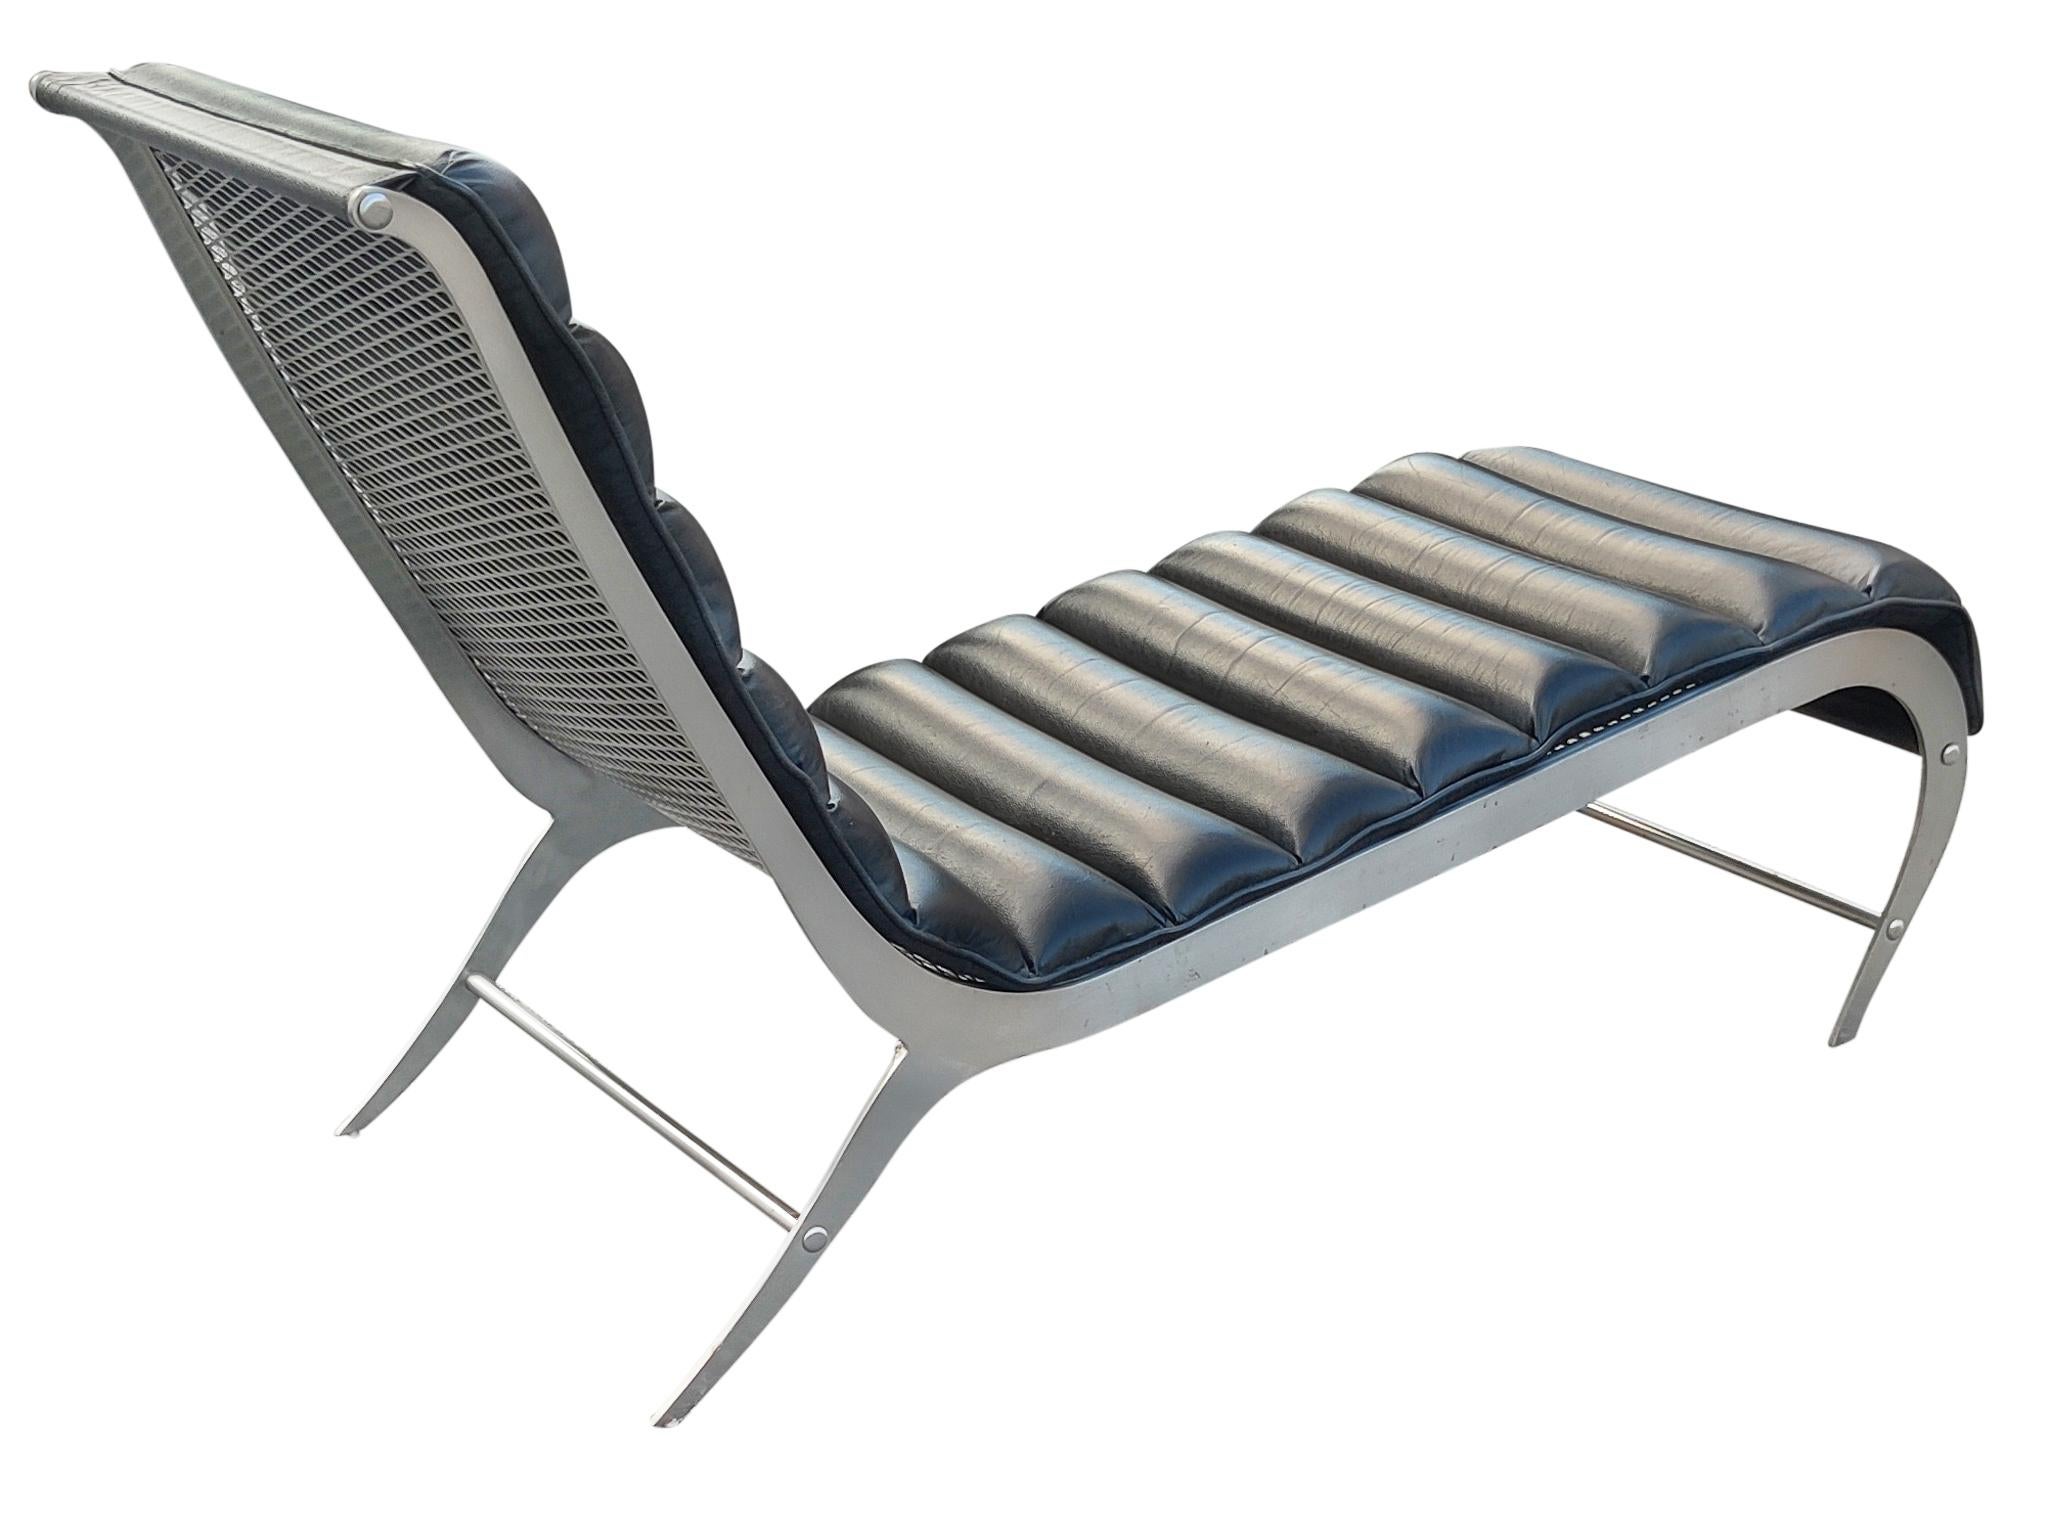 Mid-20th Century Italian Mid-Century Modern Chaise Lounge Brushed Steel Black Leather Vintage  For Sale